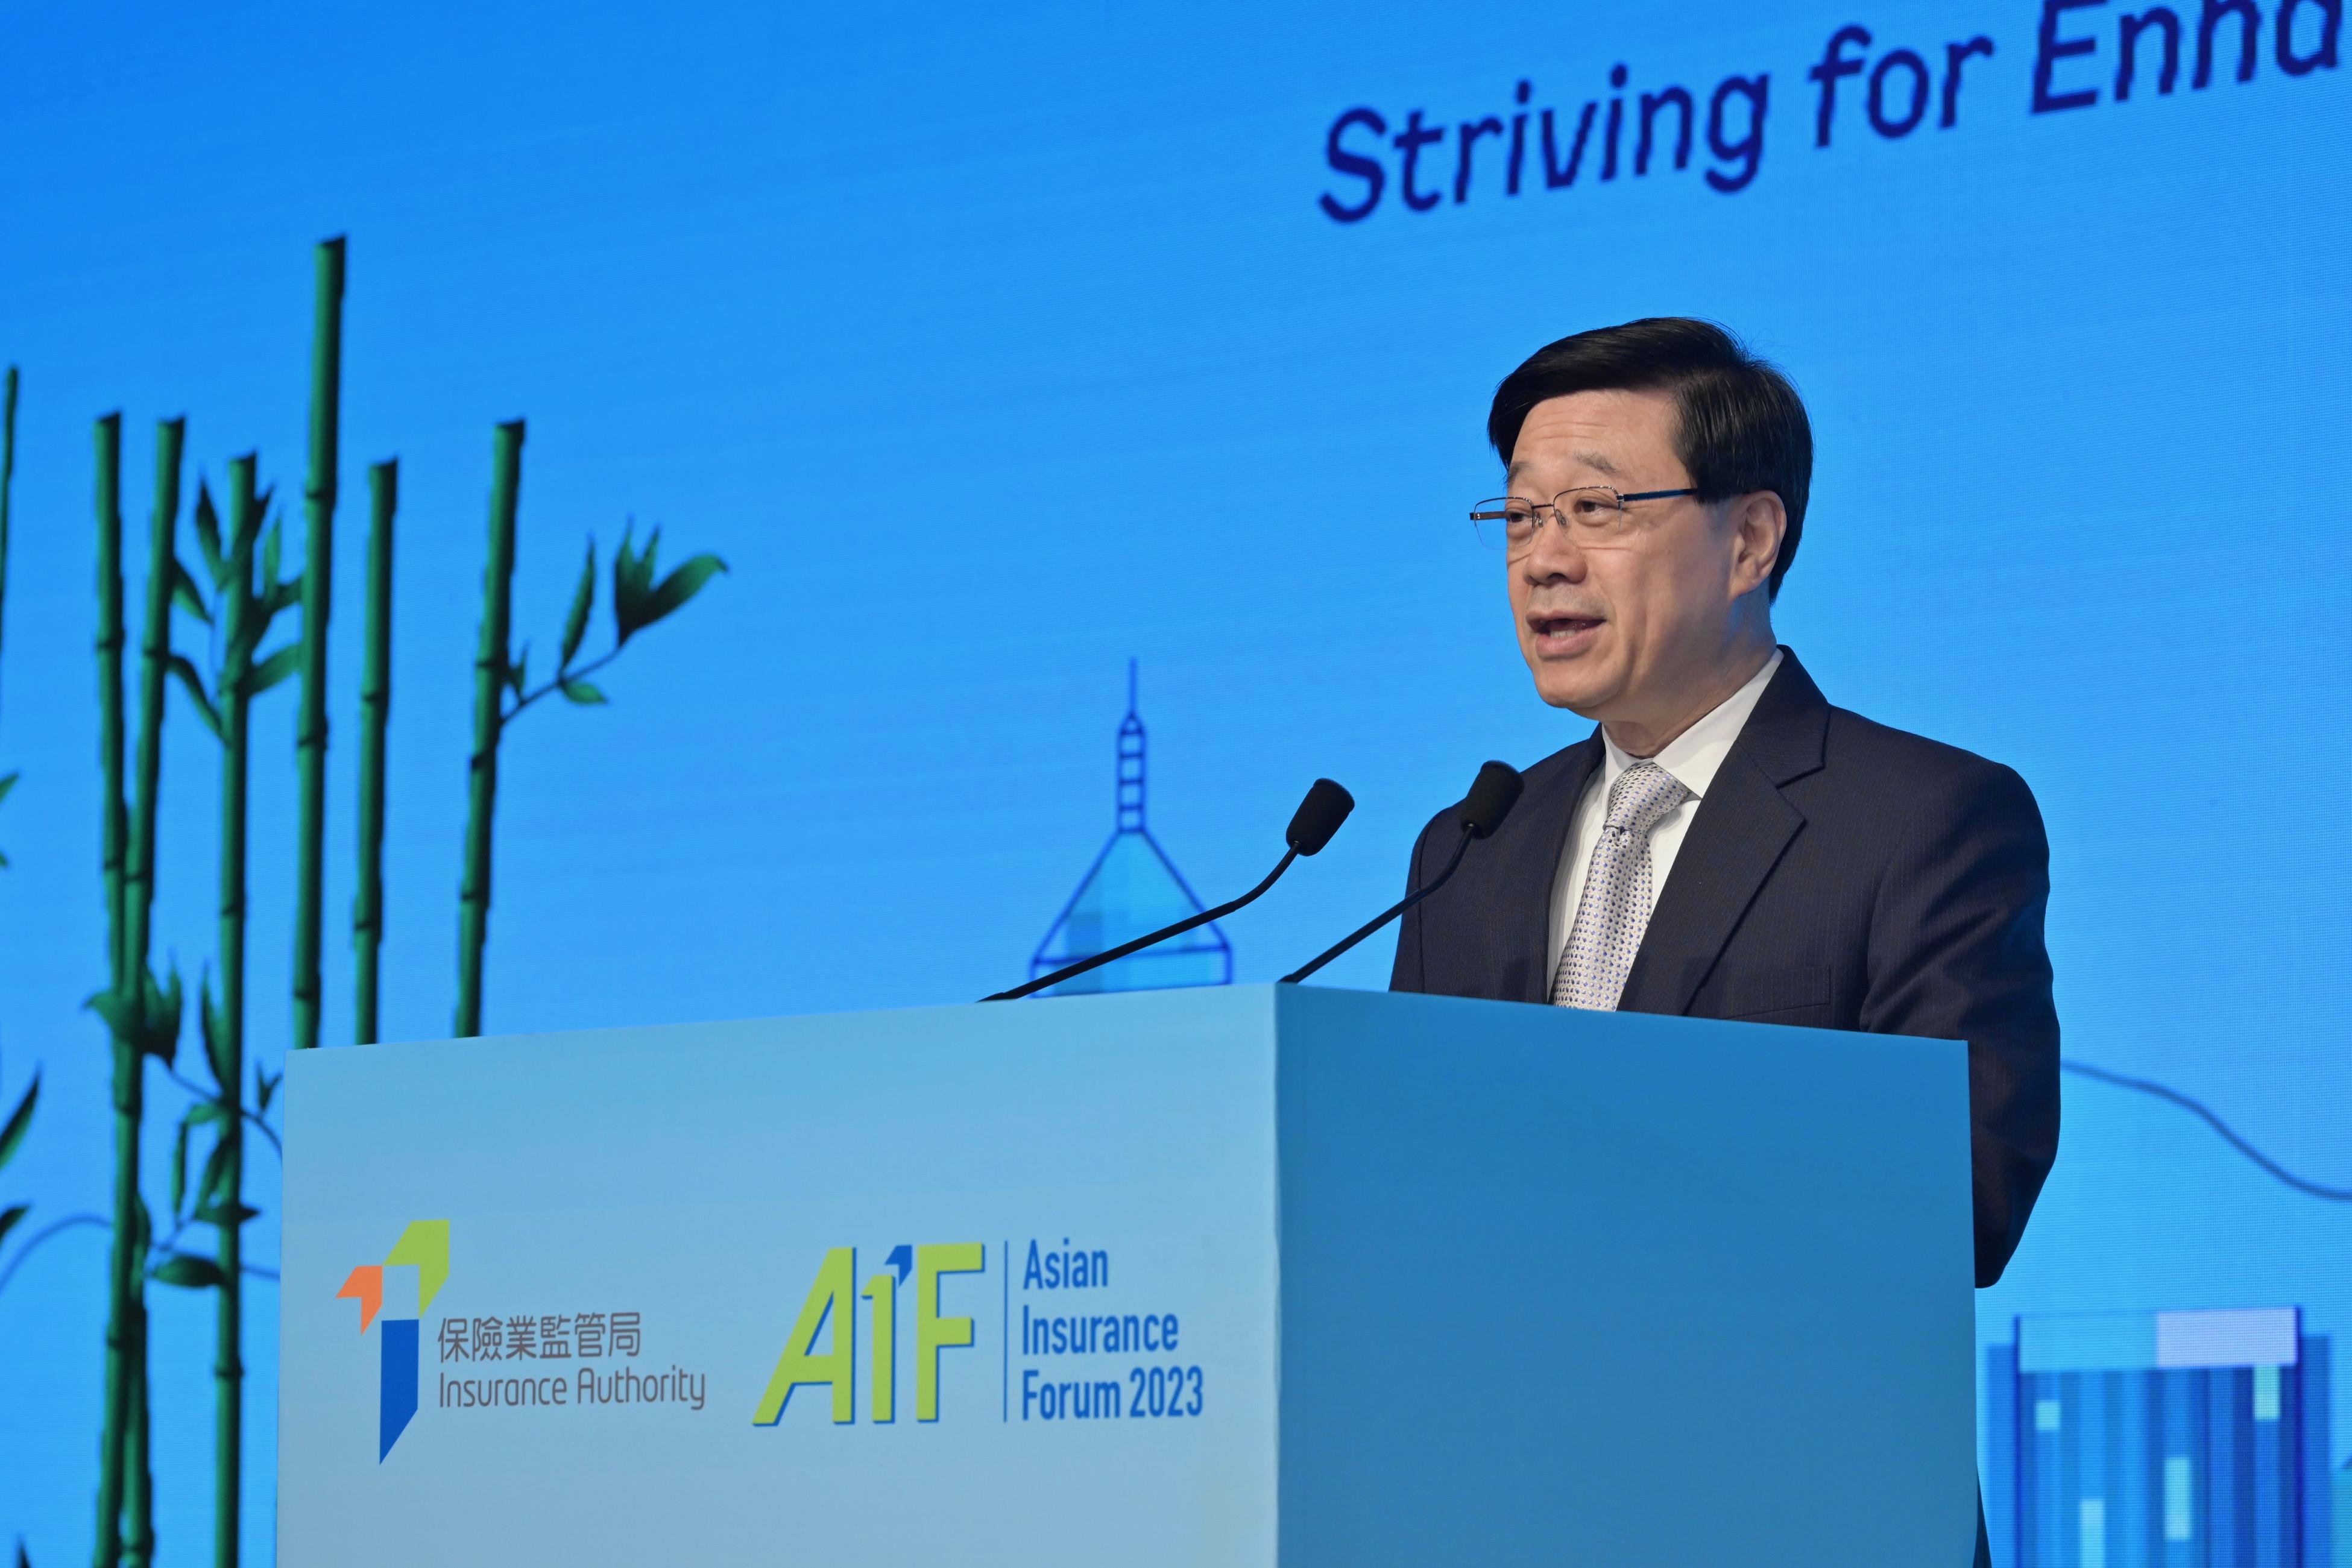 The Chief Executive, Mr John Lee, speaks at the Asian Insurance Forum 2023 today (December 8).